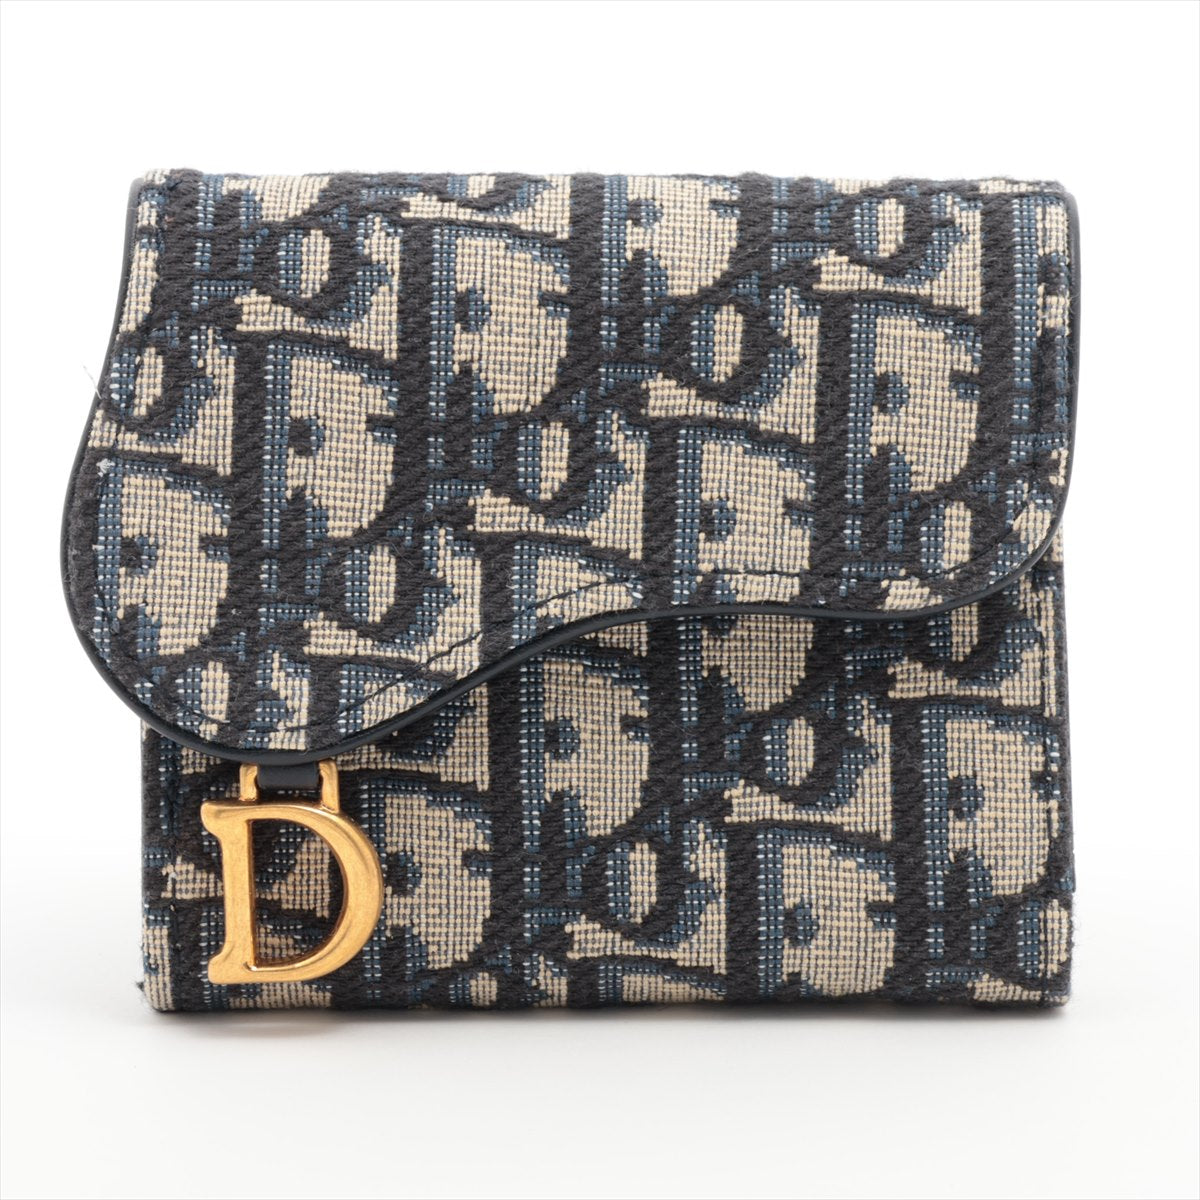 Dior Trotter Saddle Canvas & Leather Compact Wallet Navy Blue